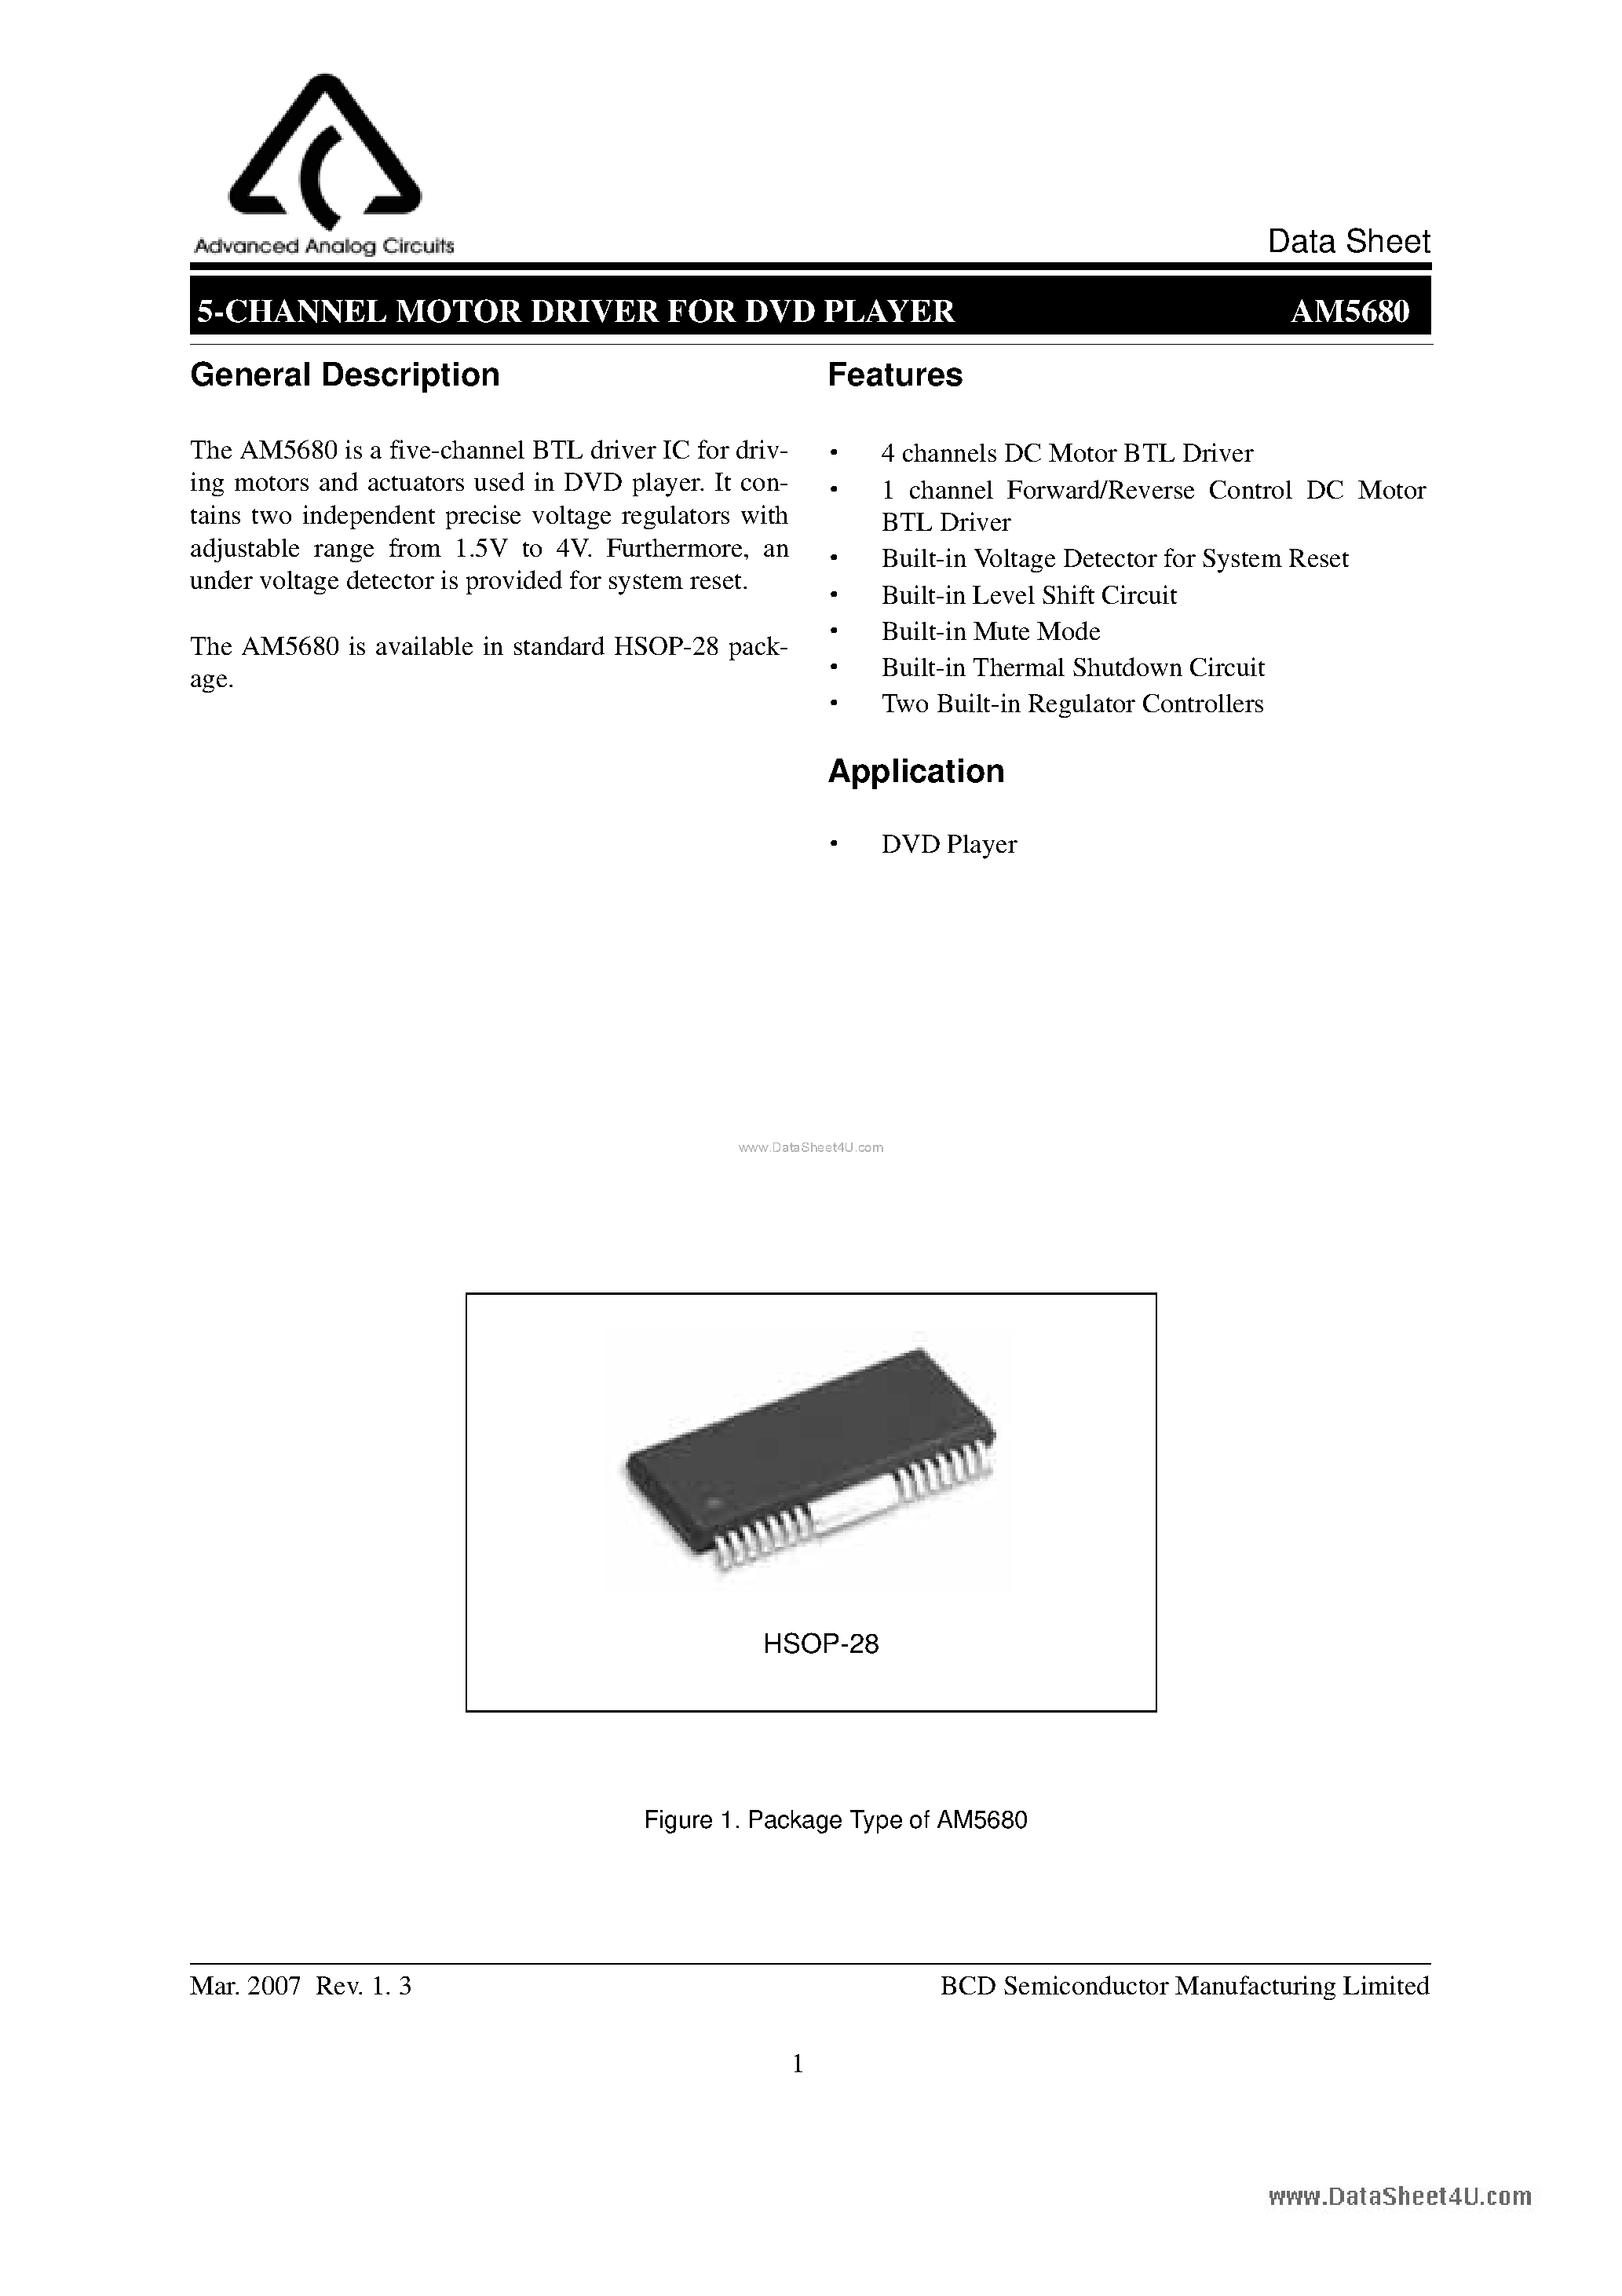 Datasheet AM5680 - 5-CHANNEL MOTOR DRIVER page 1